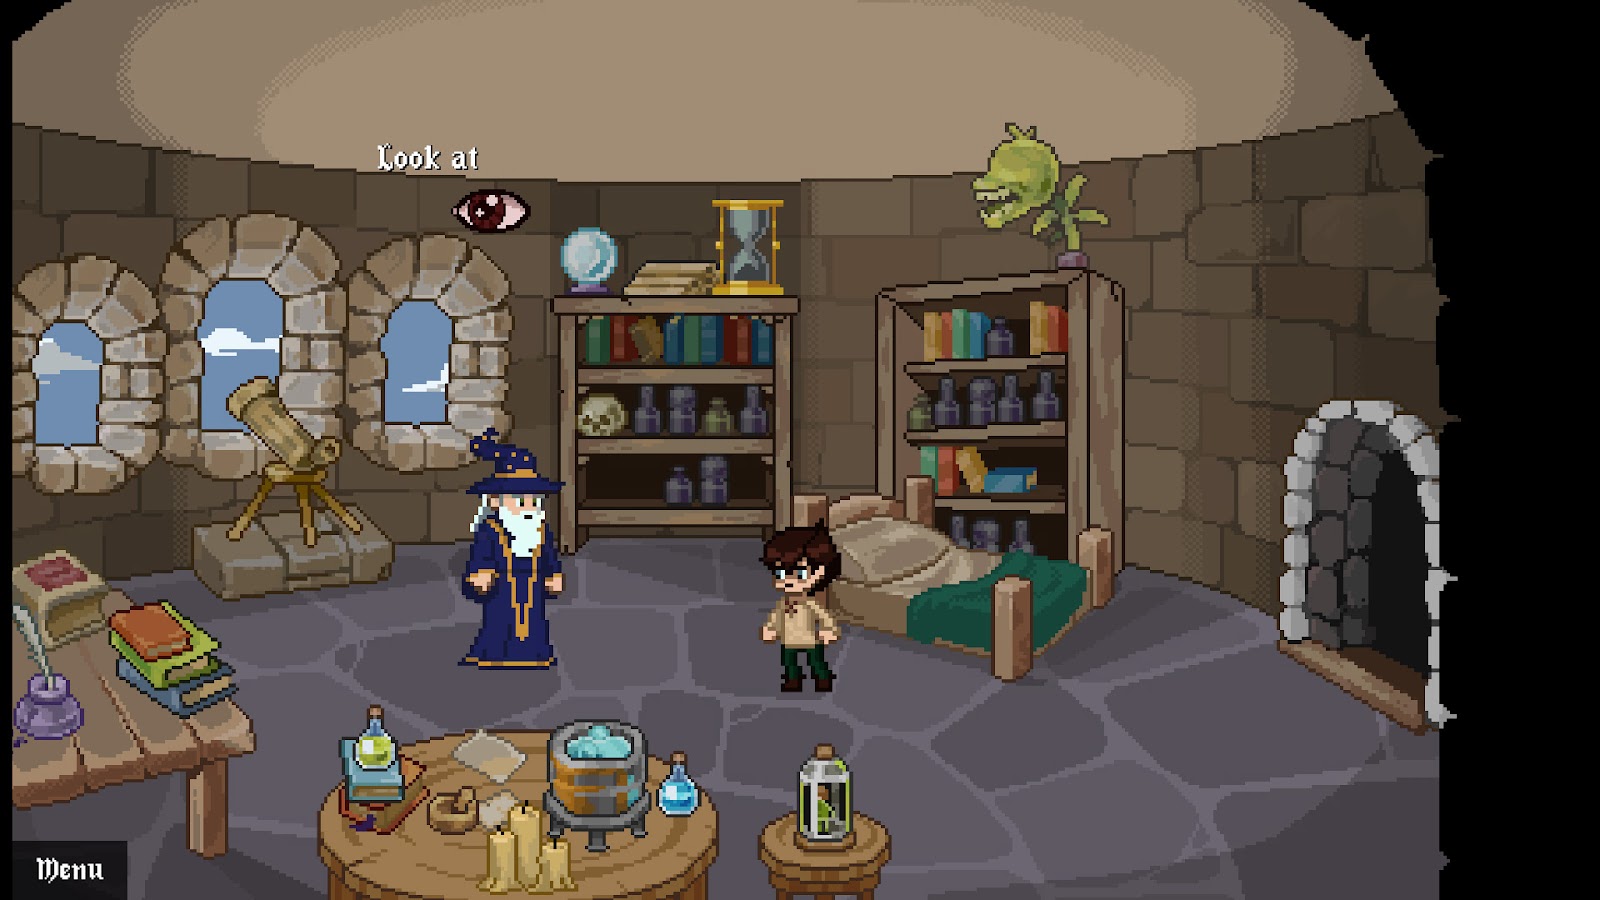 Jacob, the hero, is speaking to a wizard in what looks like a laboratory.